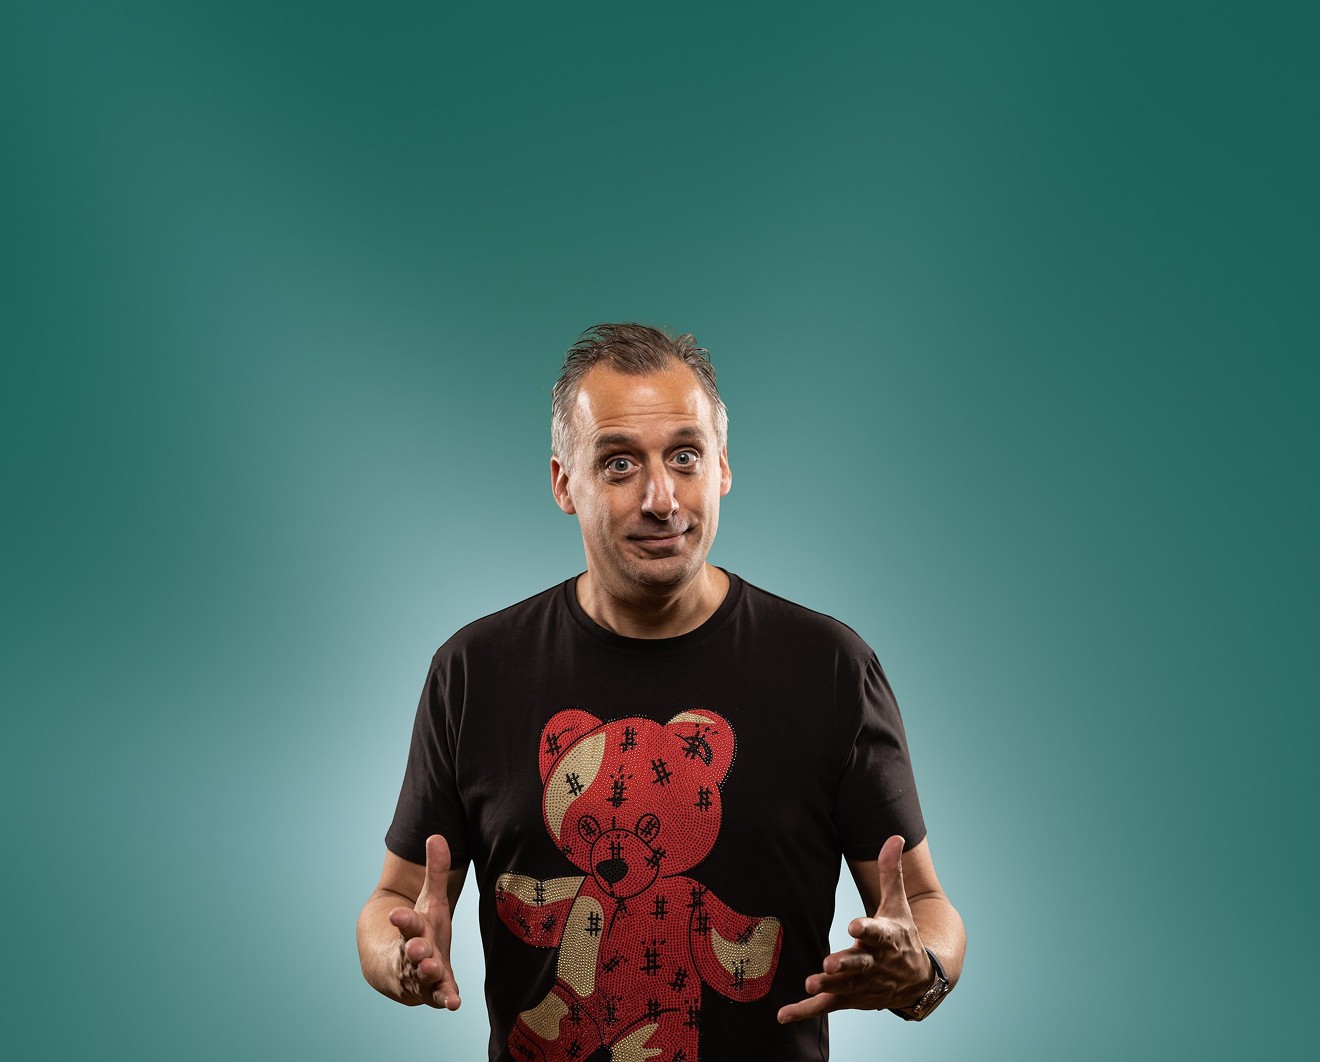 Joe Gatto will bring his stand-up routine to the Majestic on Nov. 10.